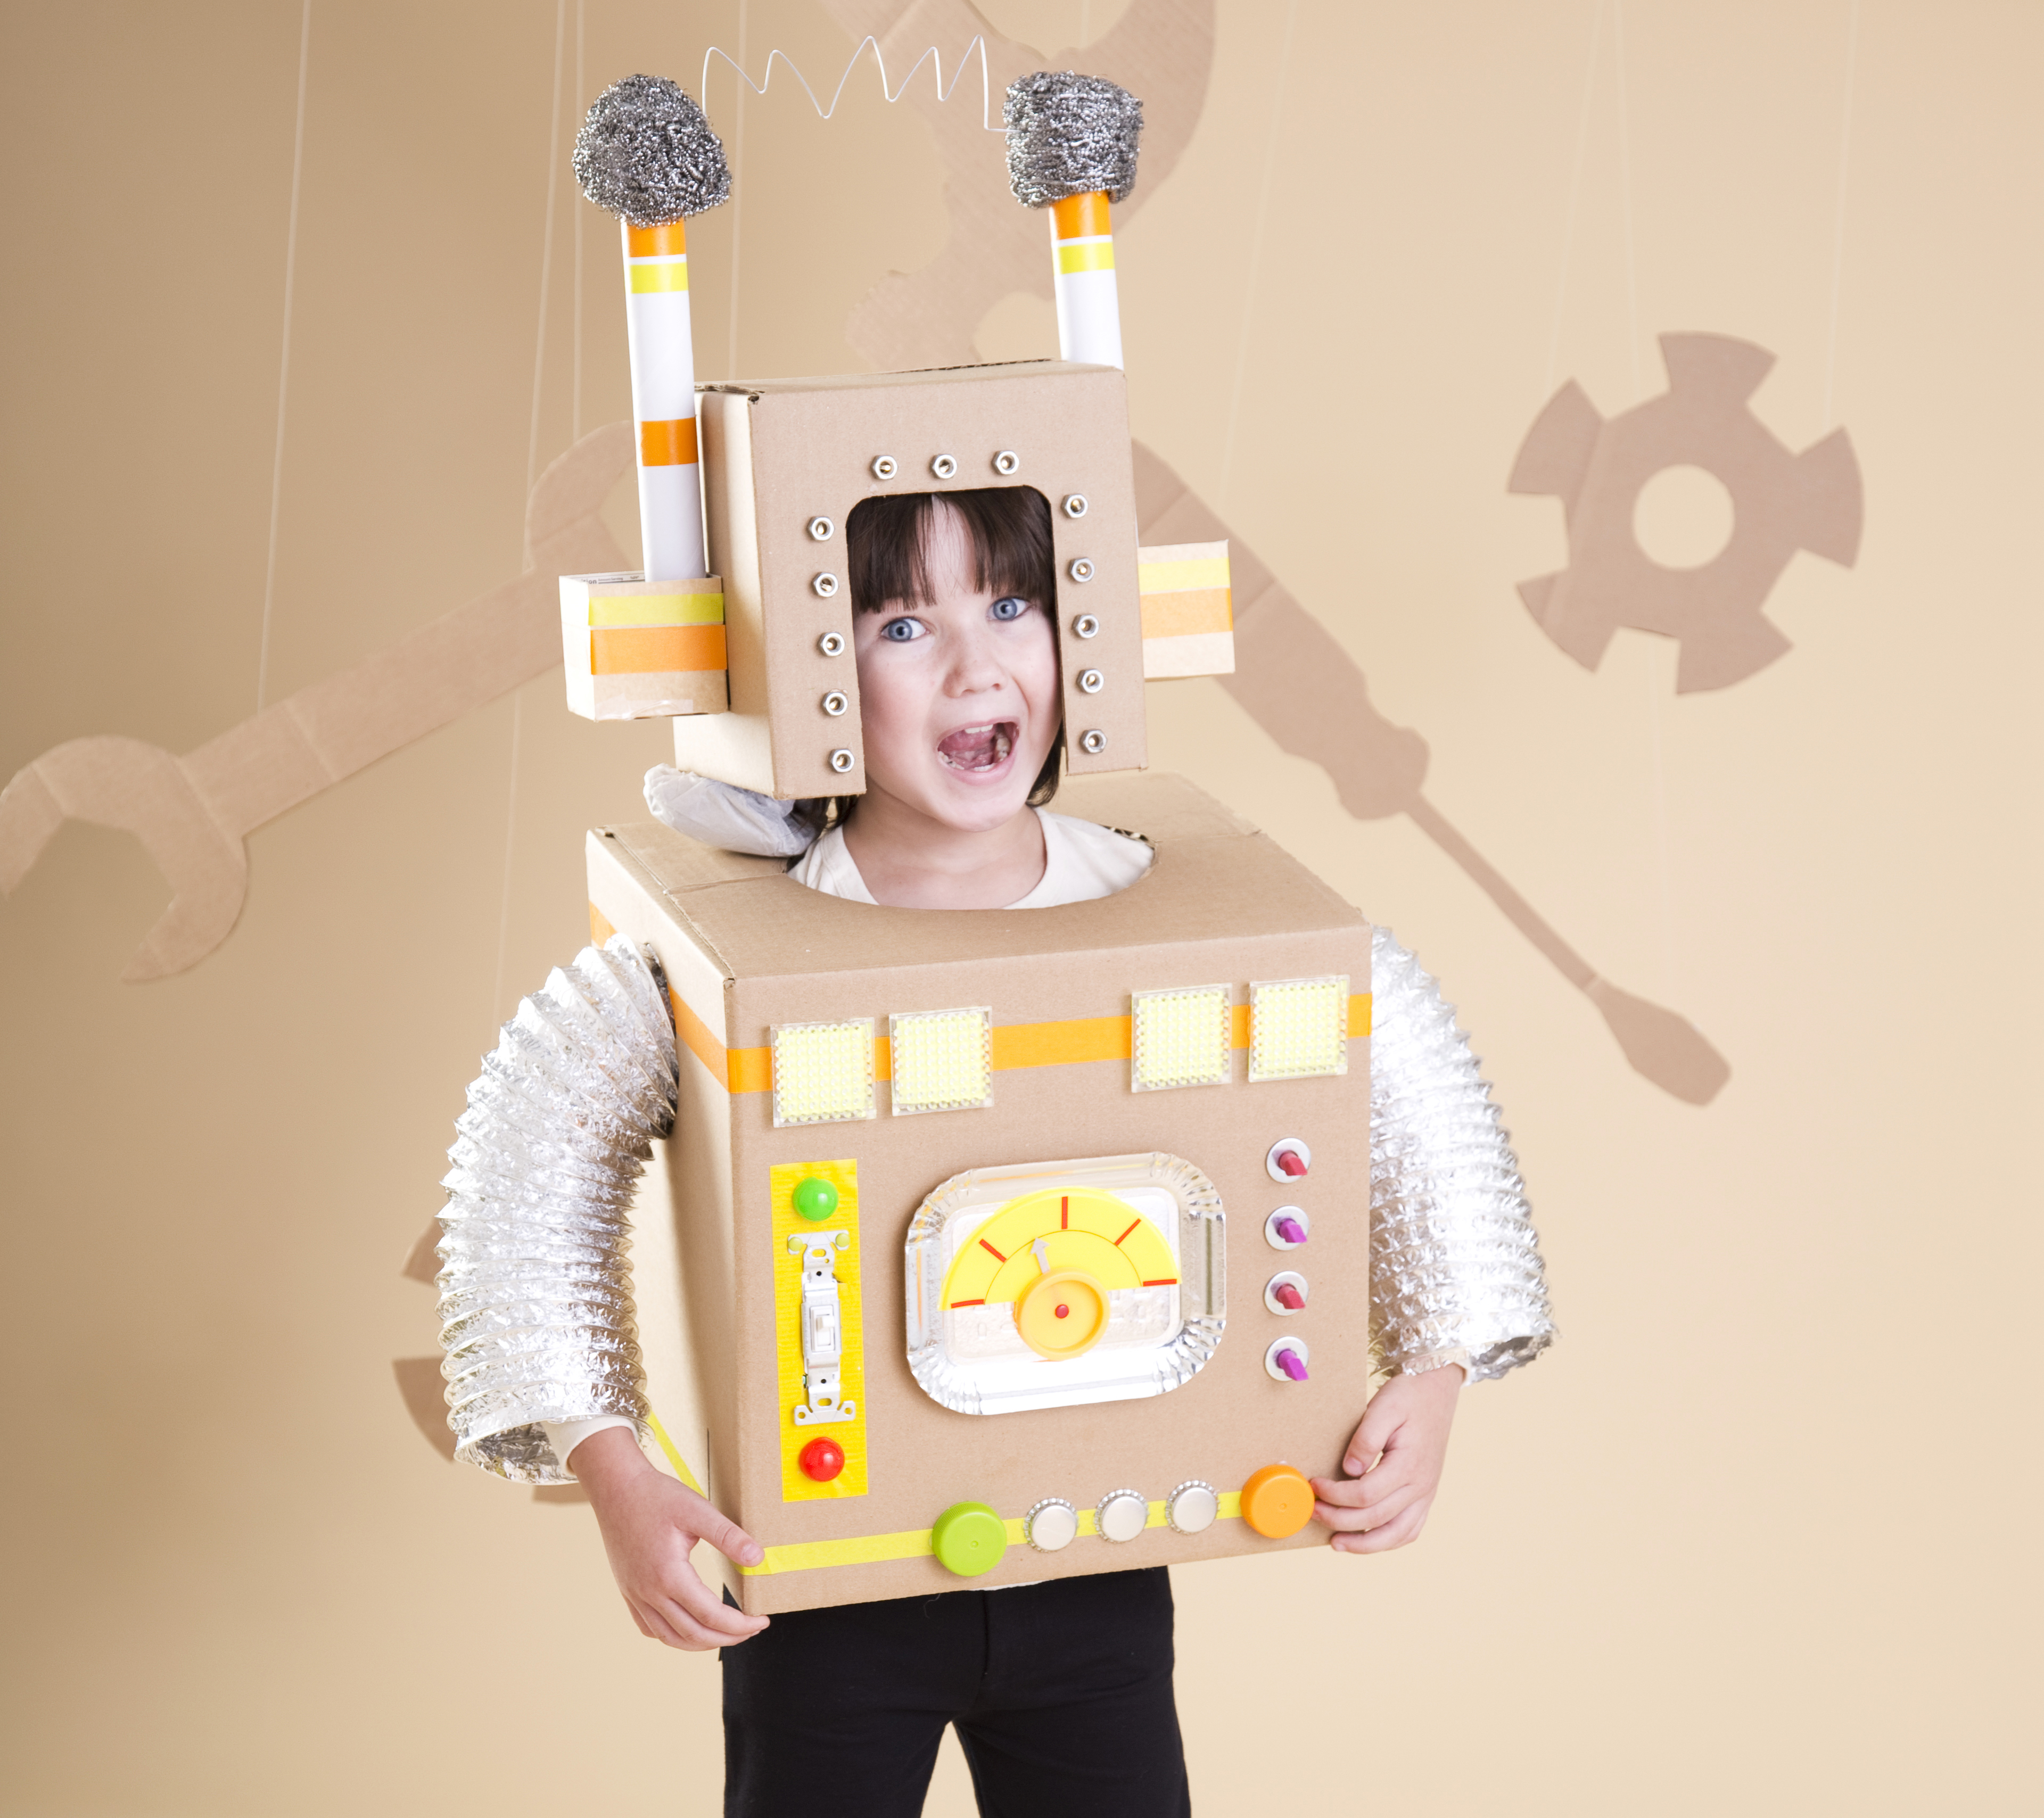 Make DIY Halloween Costumes from Cardboard Boxes